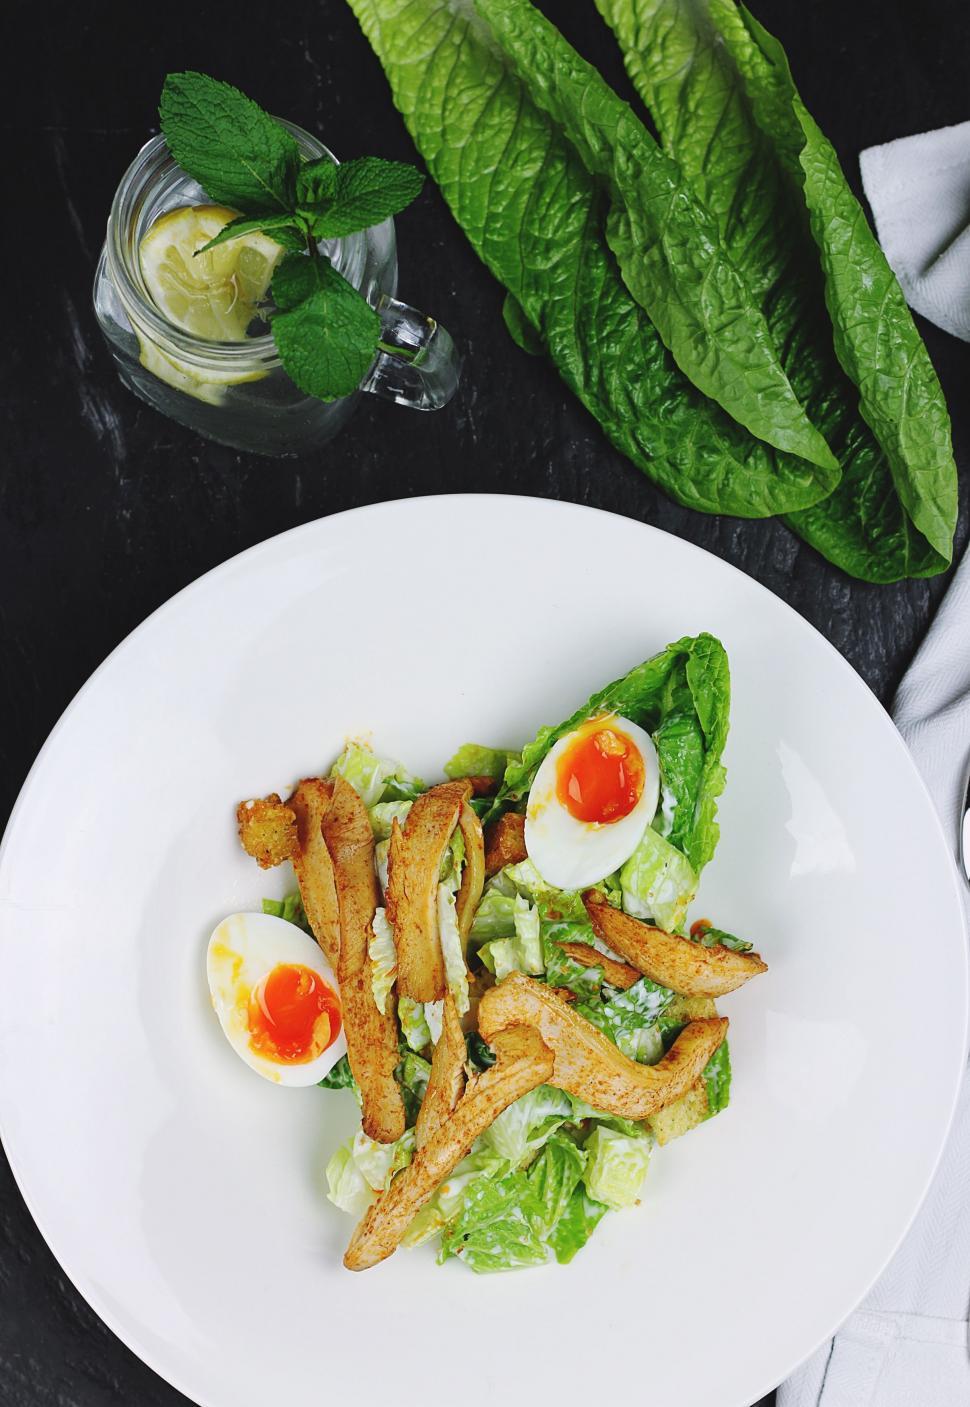 Free Image of White Plate With Lettuce and Fried Eggs 